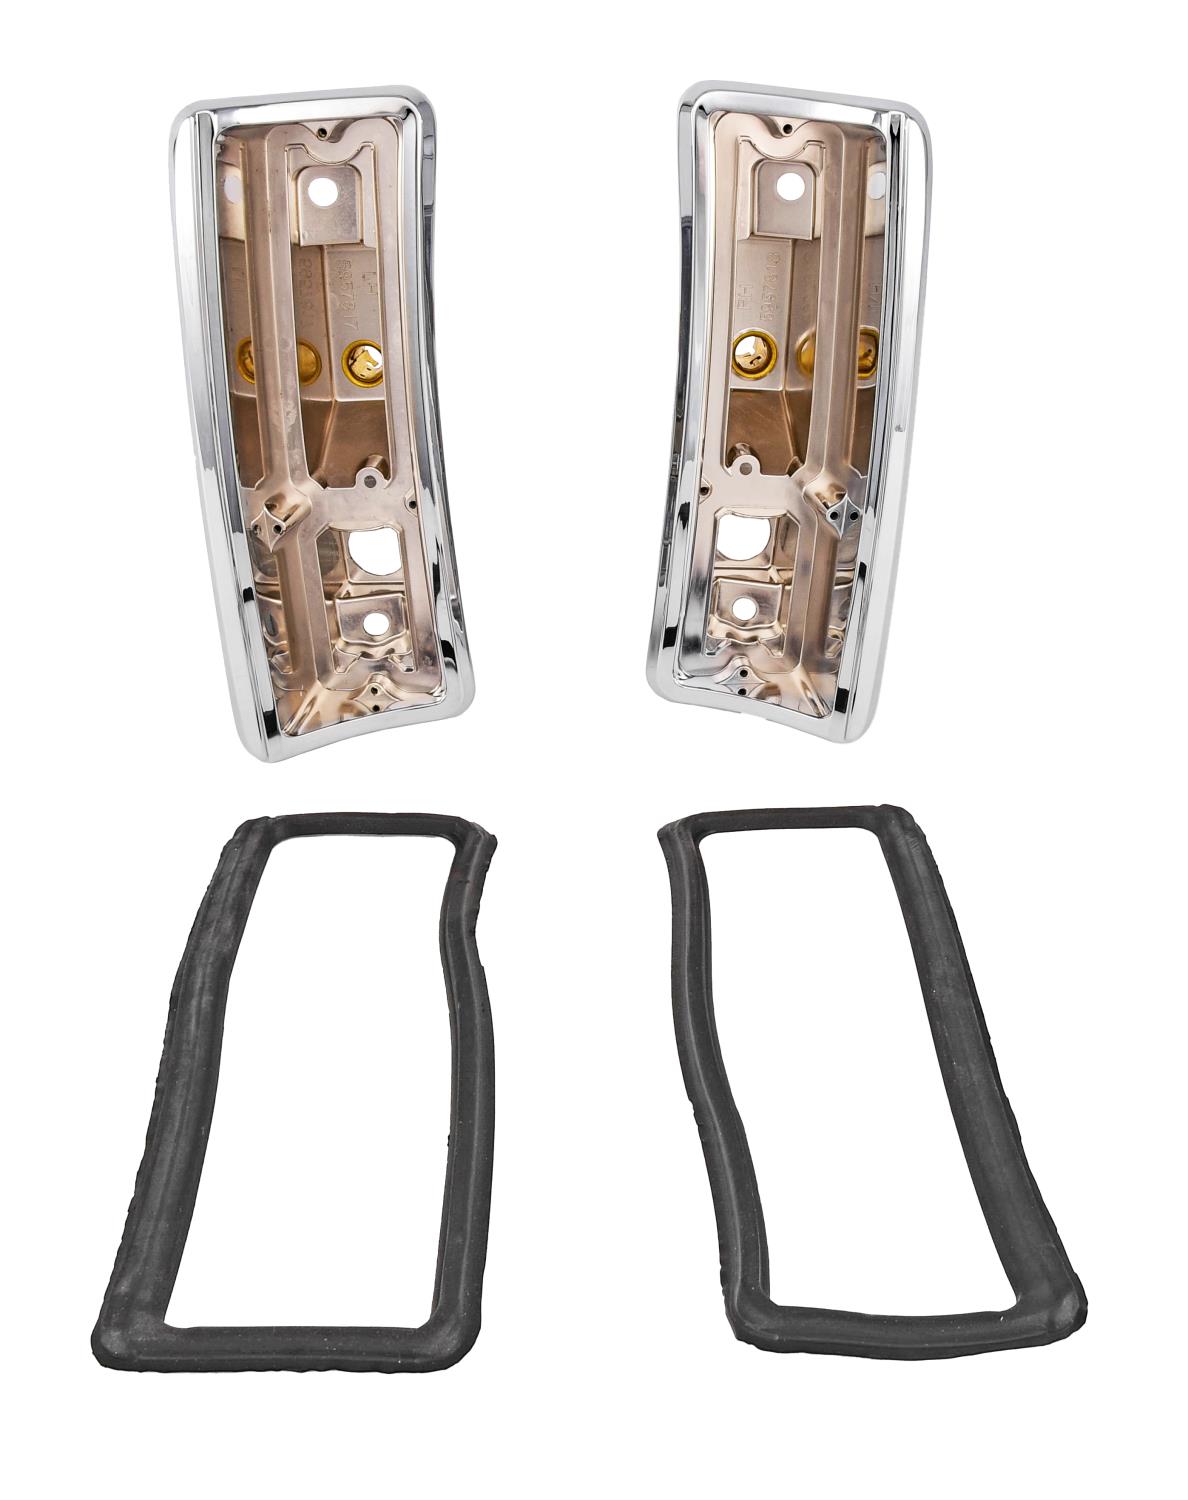 Tail Light Housings for 1966 Chevrolet Chevelle Station Wagon, El Camino